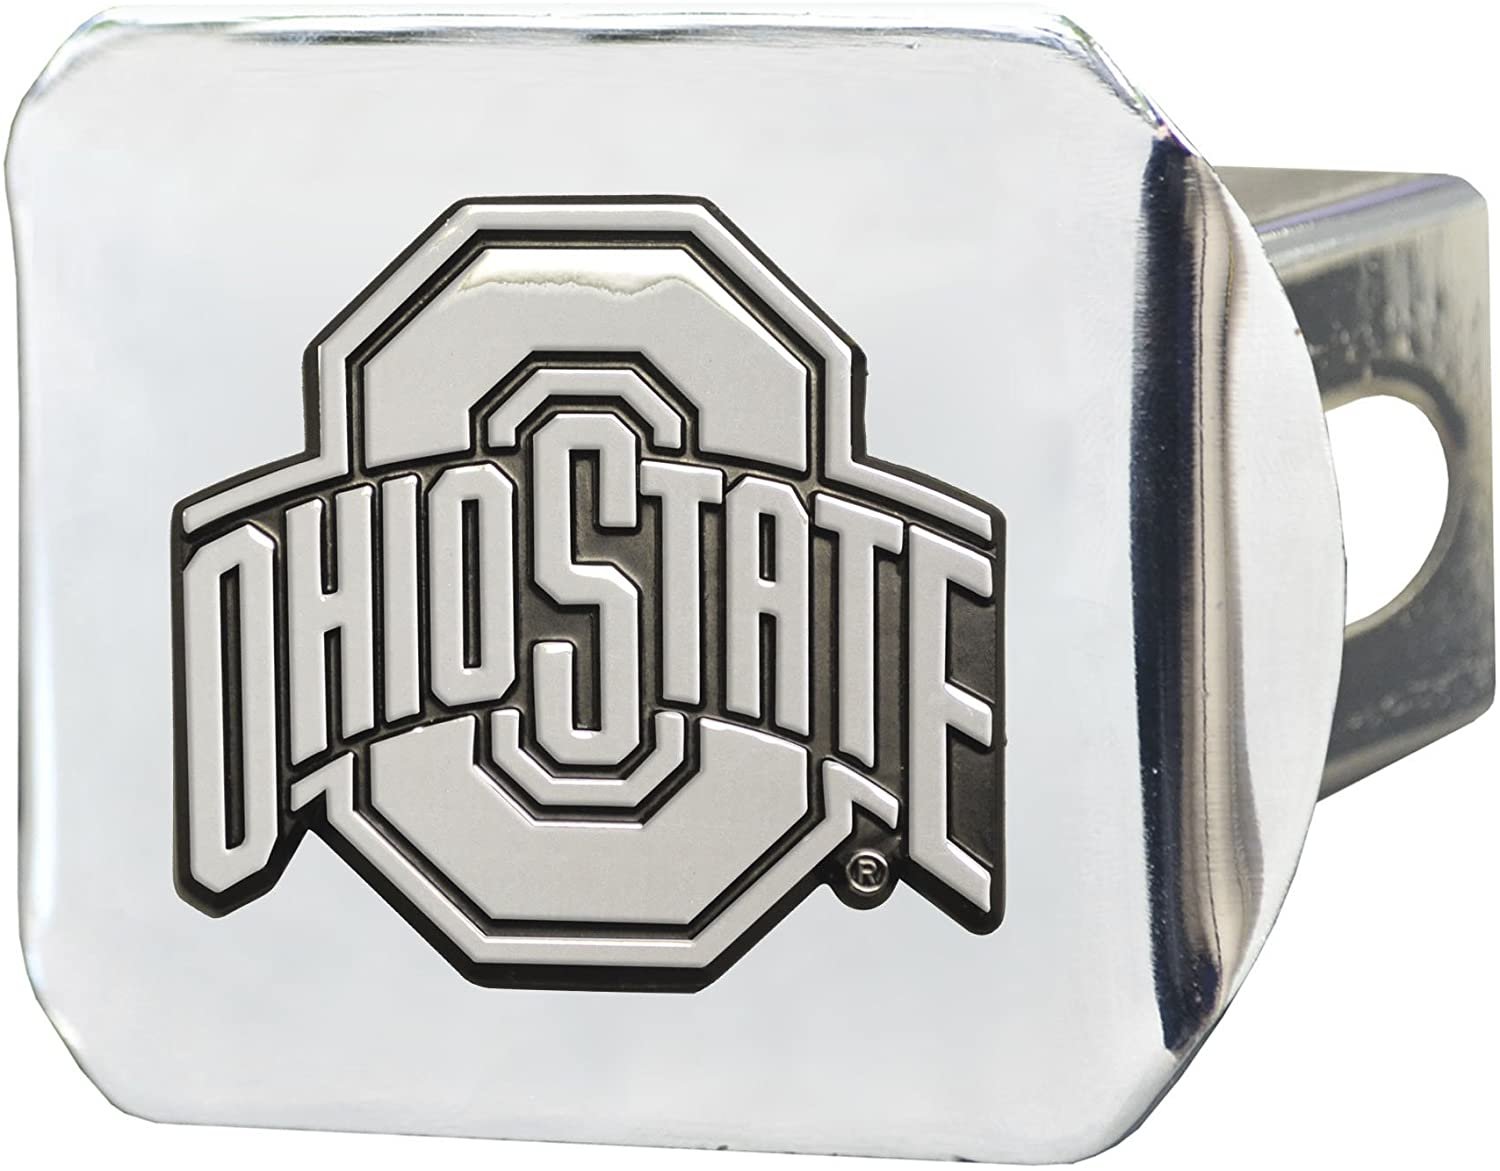 Ohio State Buckeyes Hitch Cover Solid Metal with Raised Chrome Metal Emblem 2 Inch Square Type III University